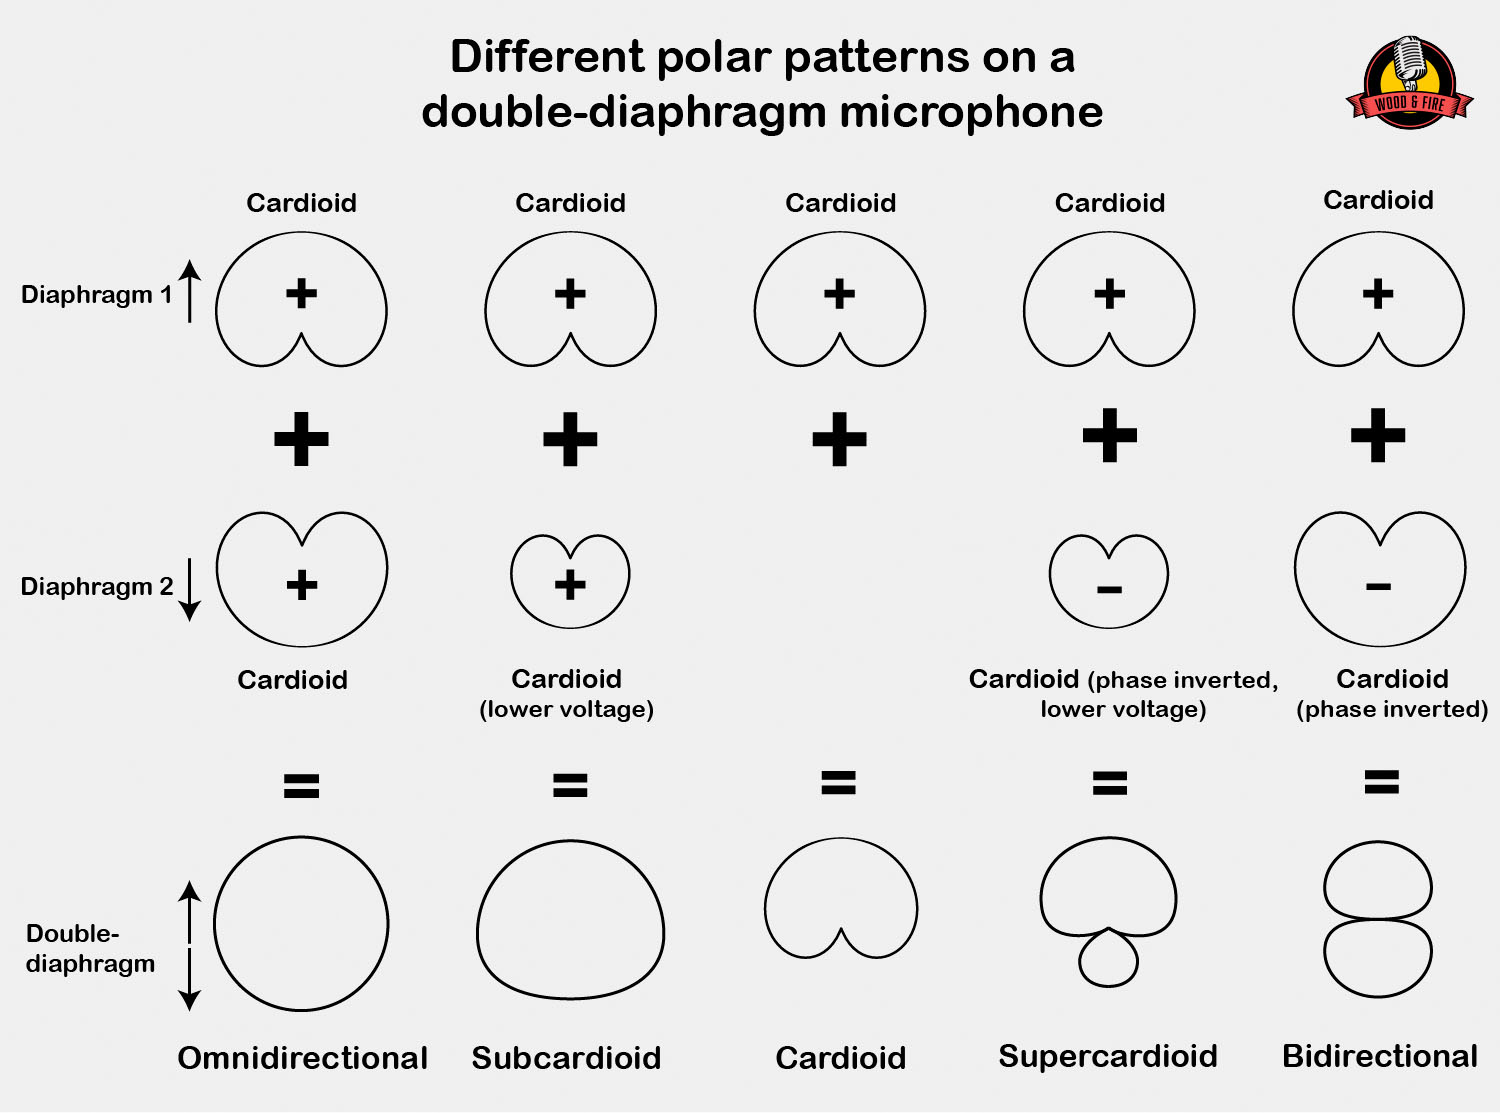 The signals from the two diaphragms are combined to produce different polar patterns.